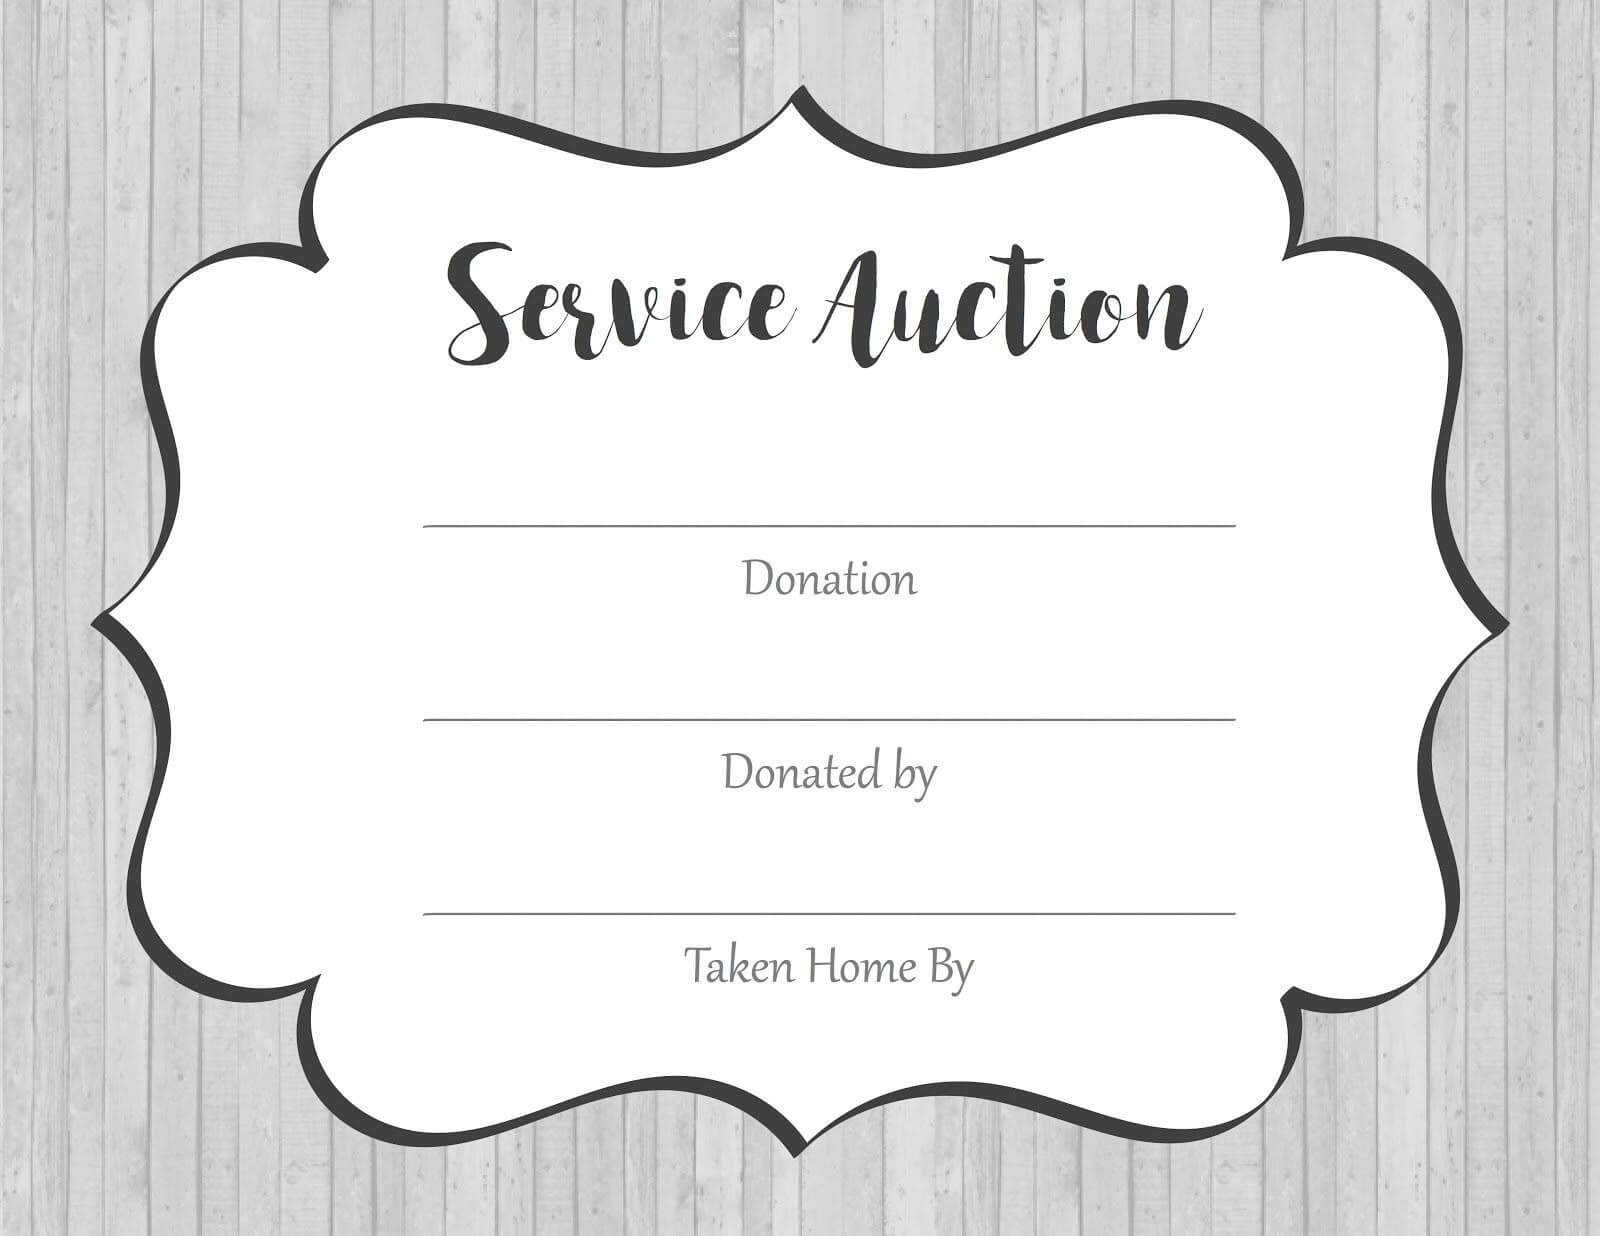 006 Silent Auction Donation Certificate Template Fantastic With Donation Certificate Template